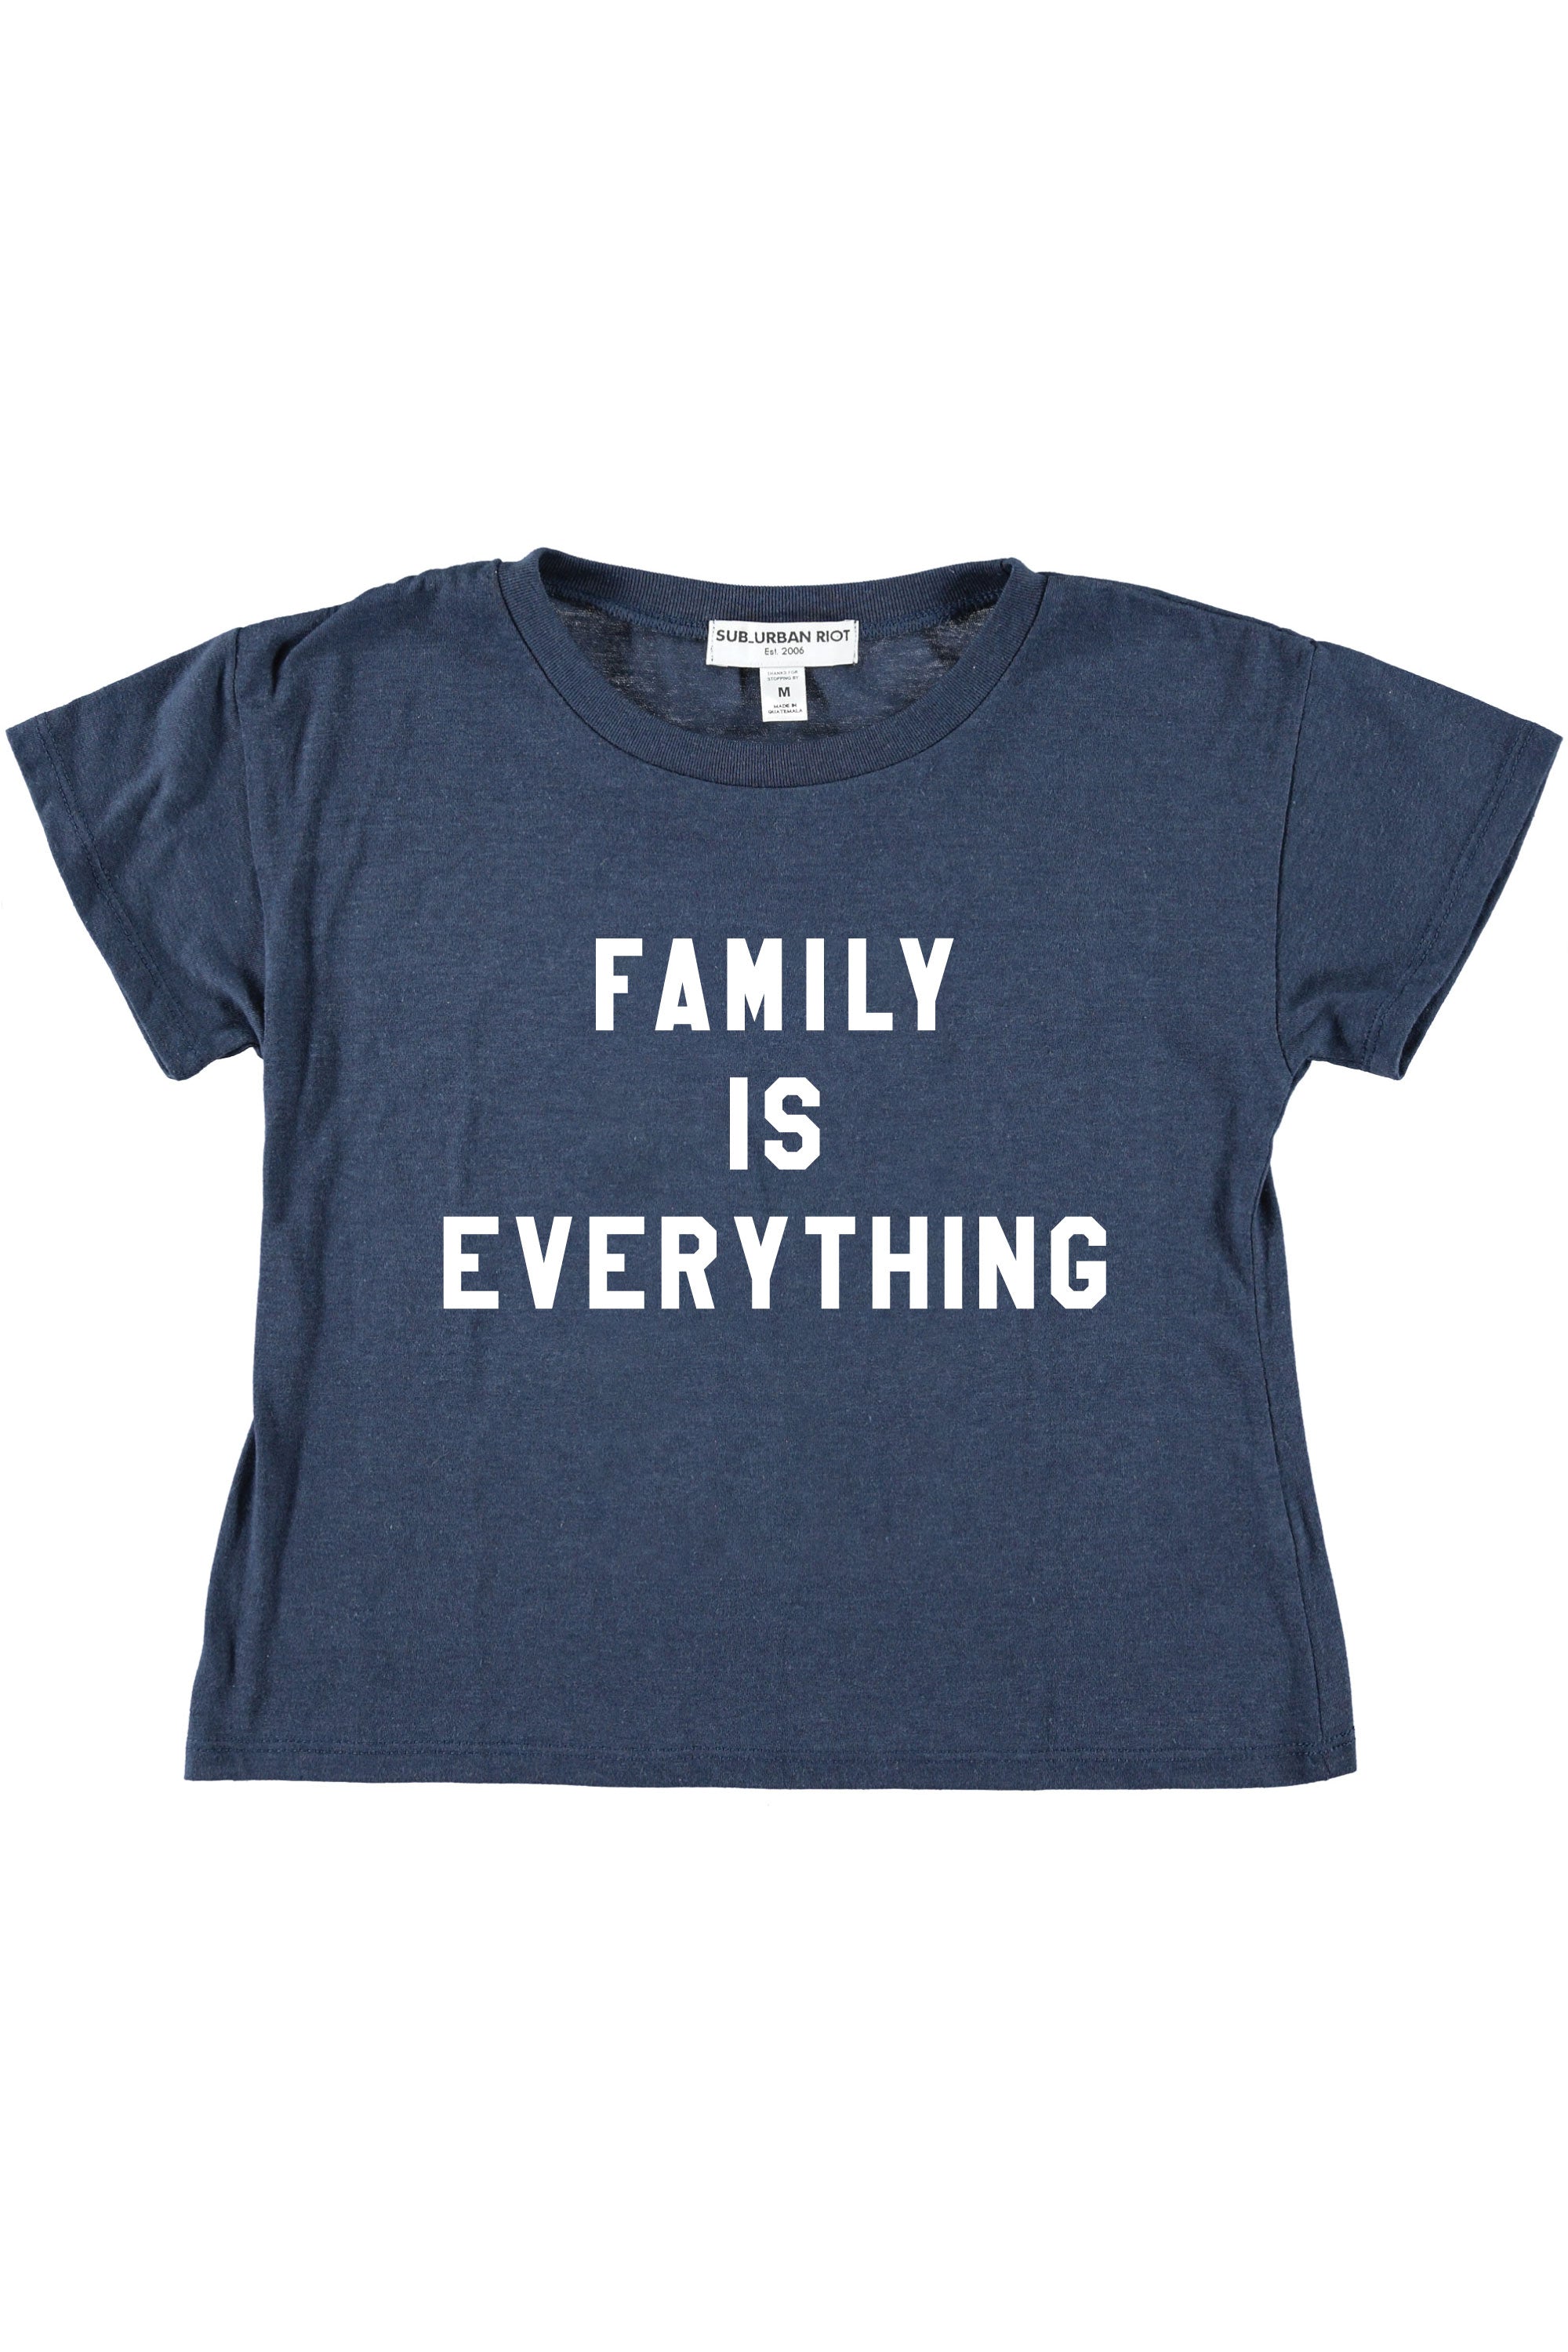 FAMILY IS EVERYTHING YOUTH SIZE CROP TEE